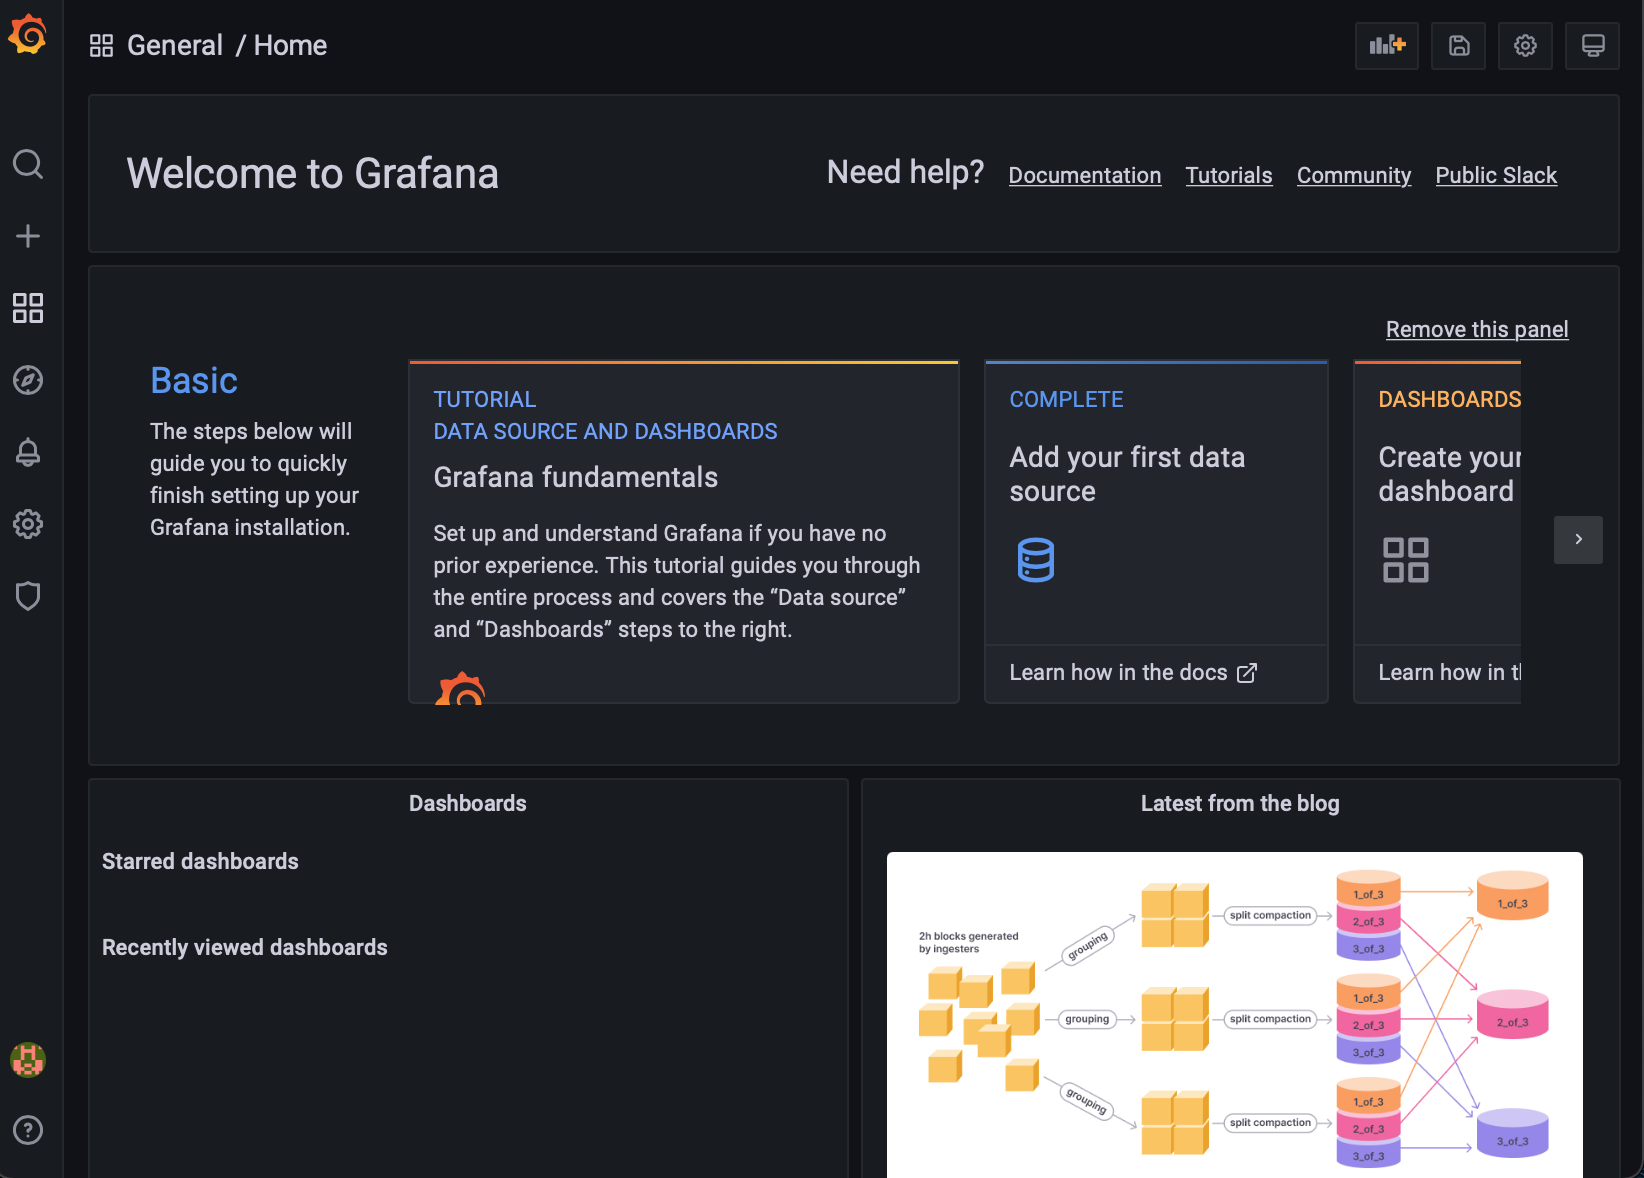 Viewing Grafana’s Home Page